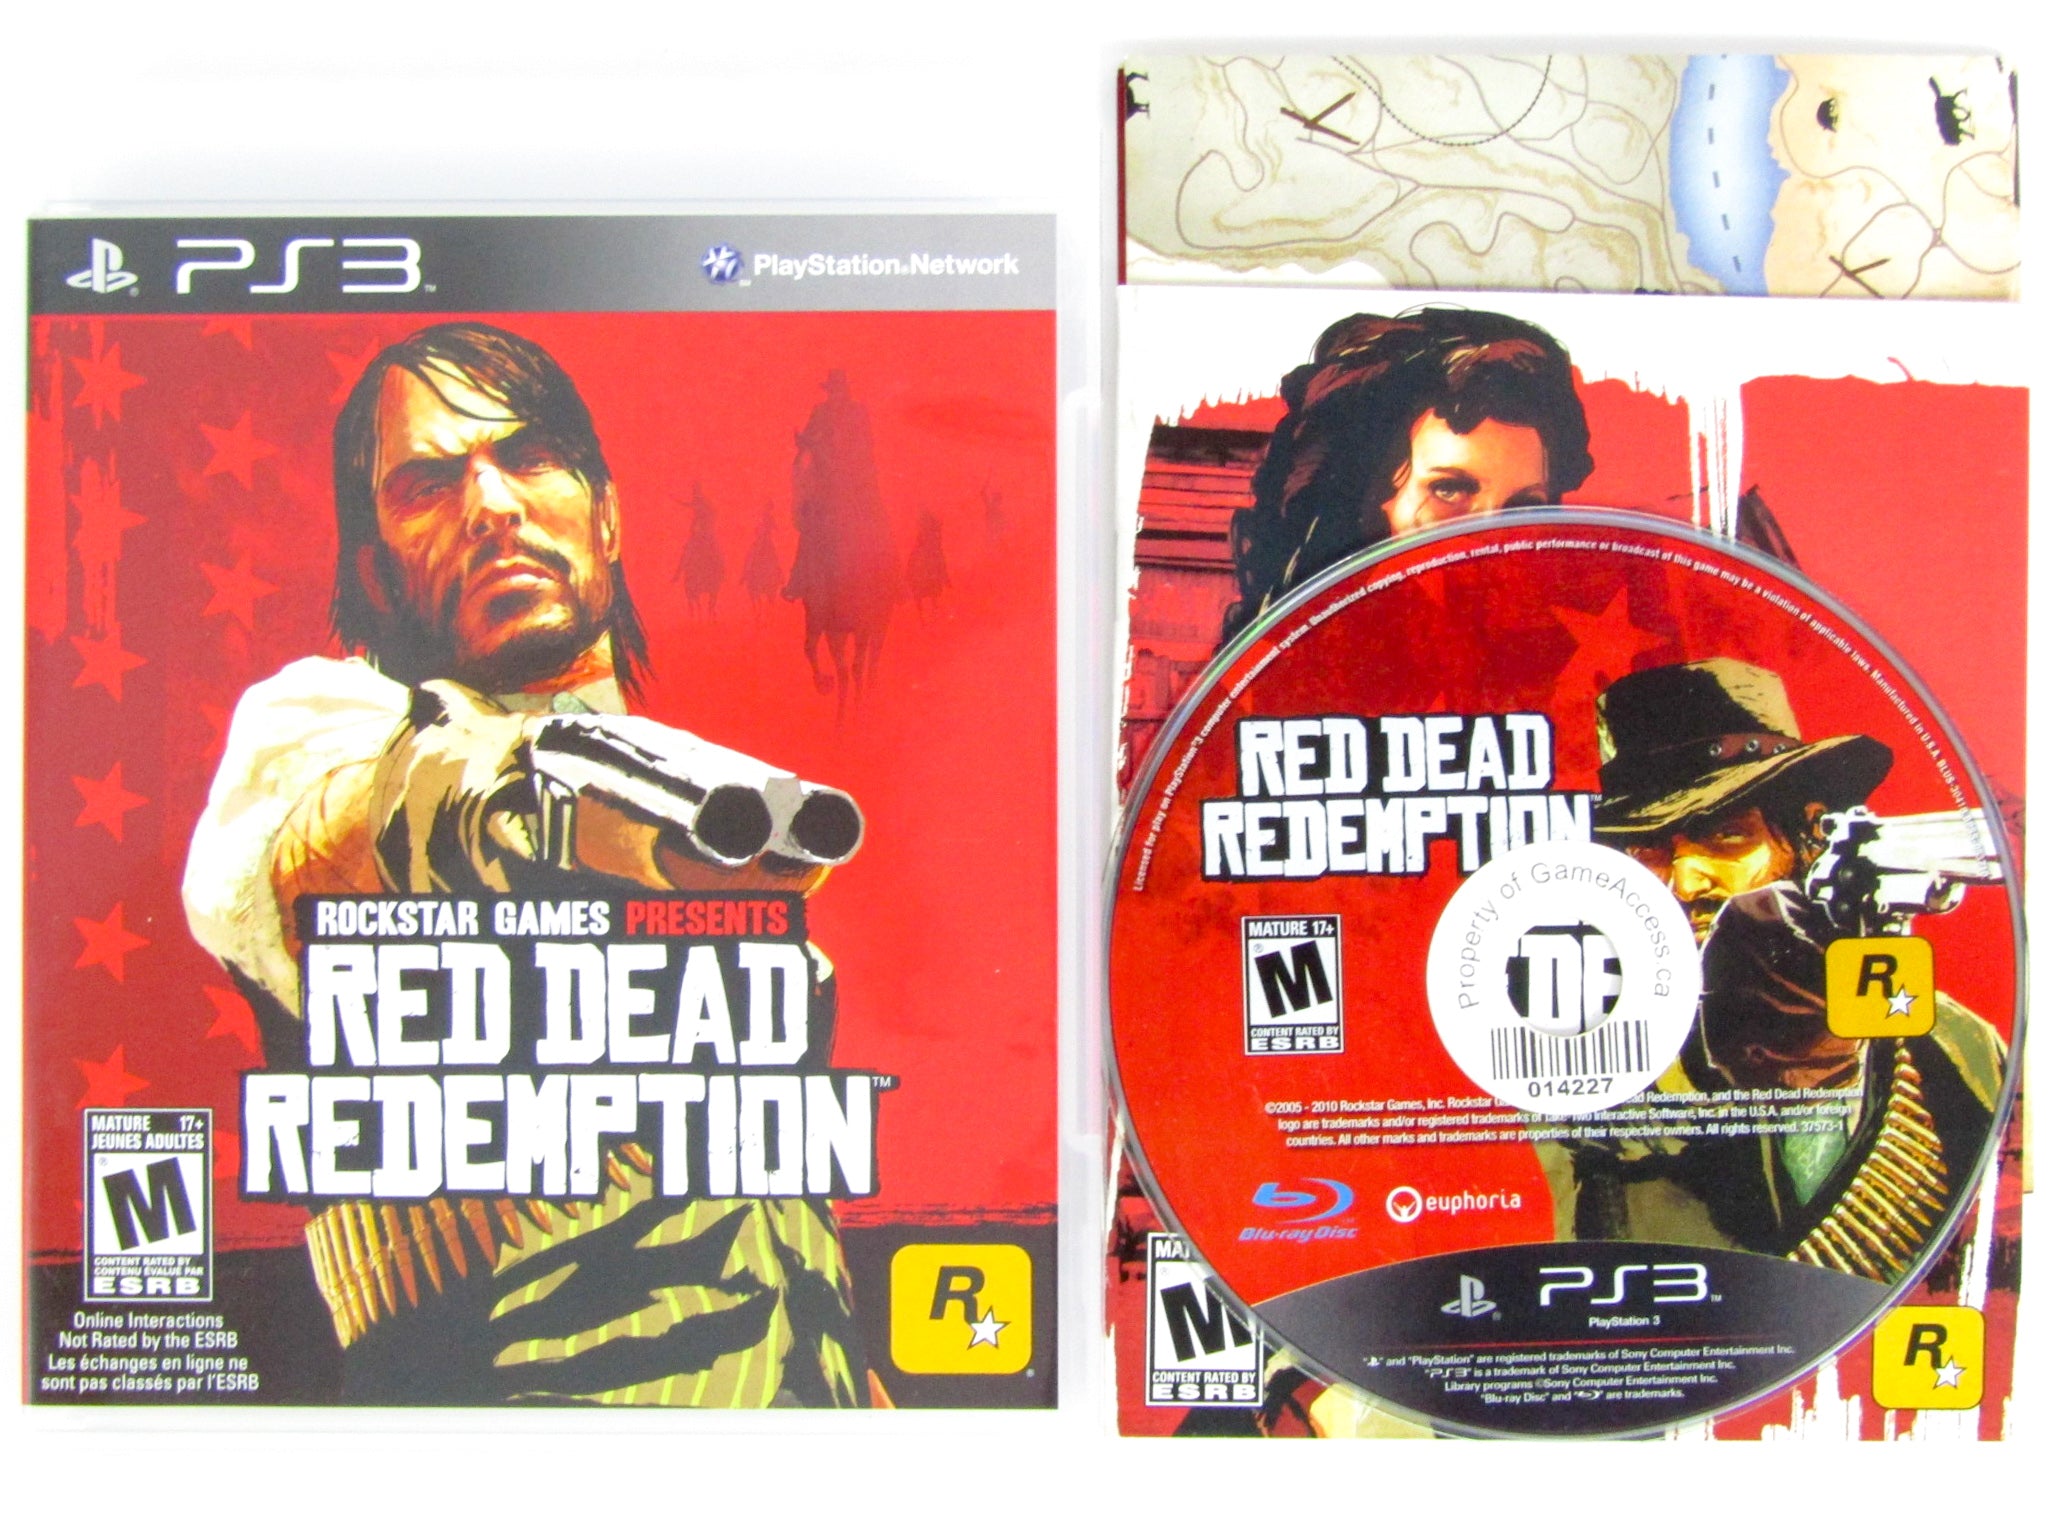 Red Dead Redemption Standard Edition PlayStation 3 37573 - Best Buy